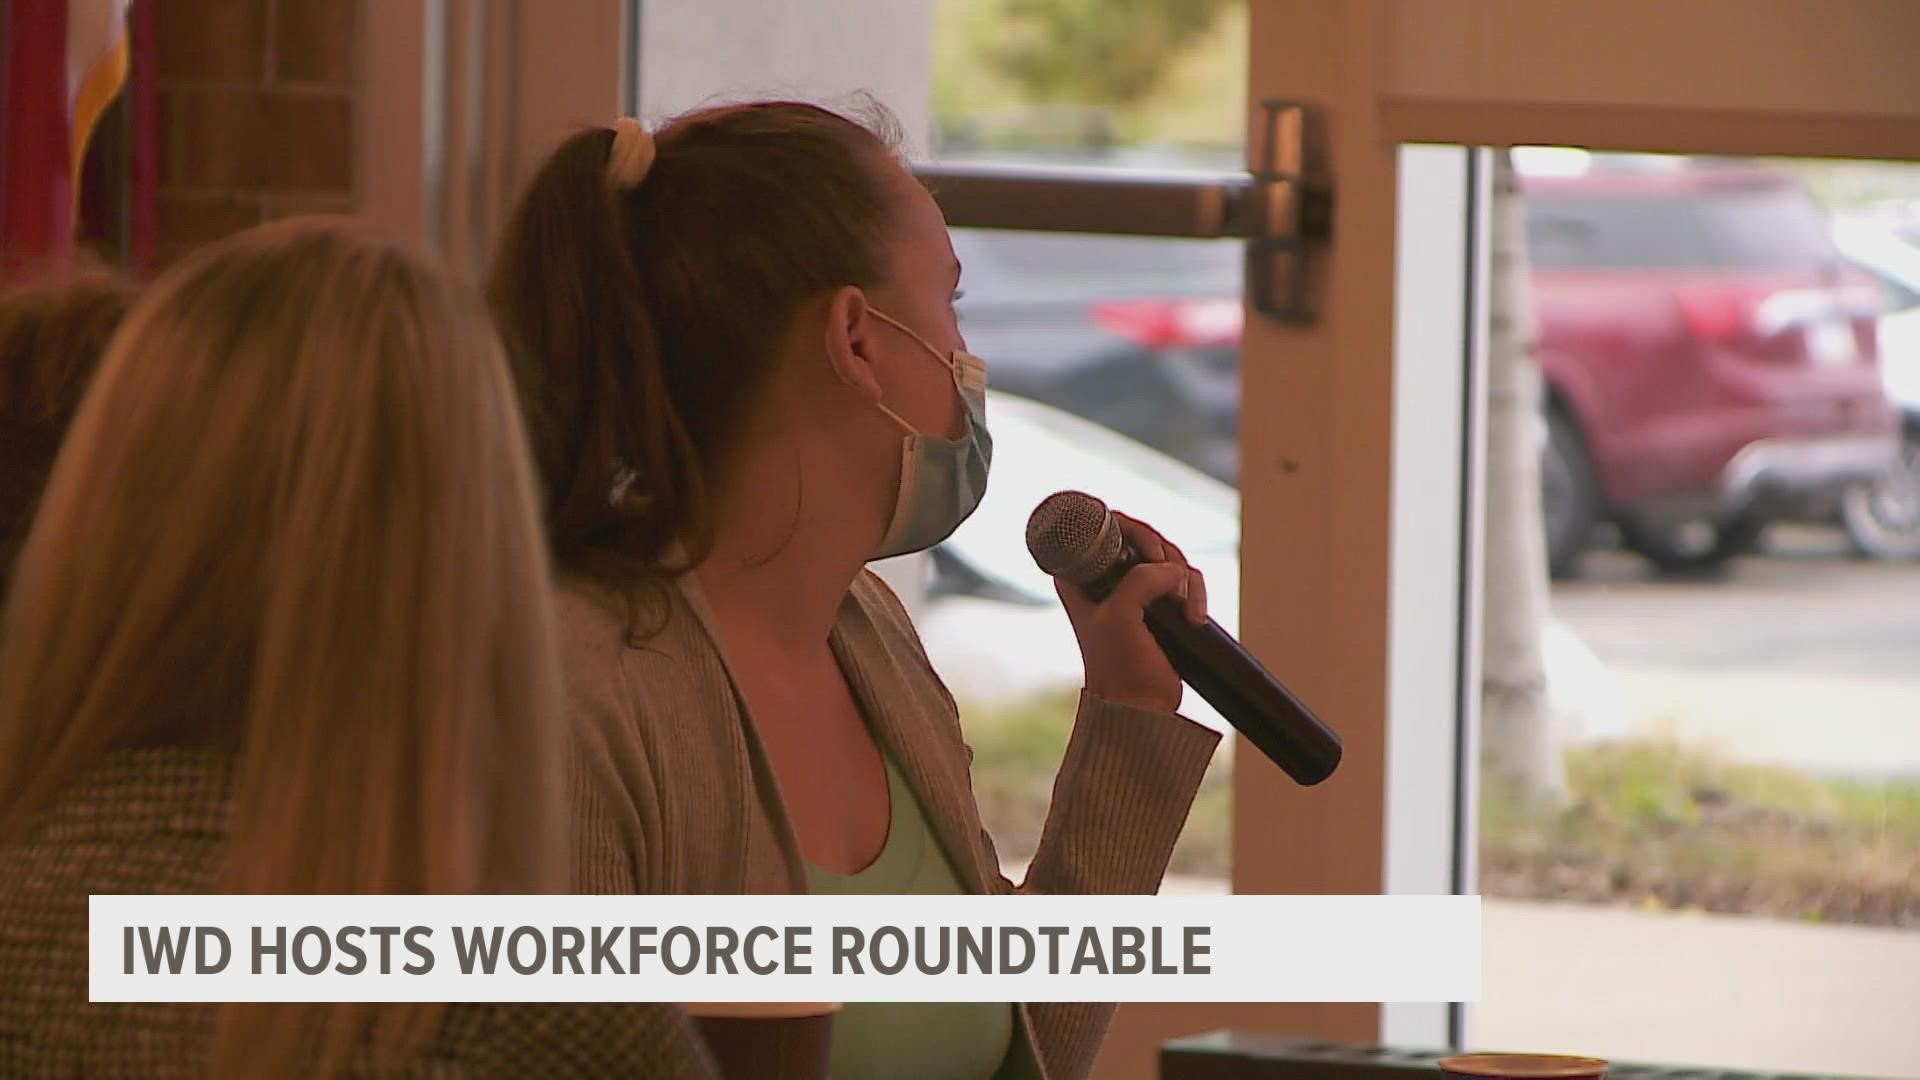 The Iowa Workforce Development said one of its goals is to collaborate businesses that hire young employees.